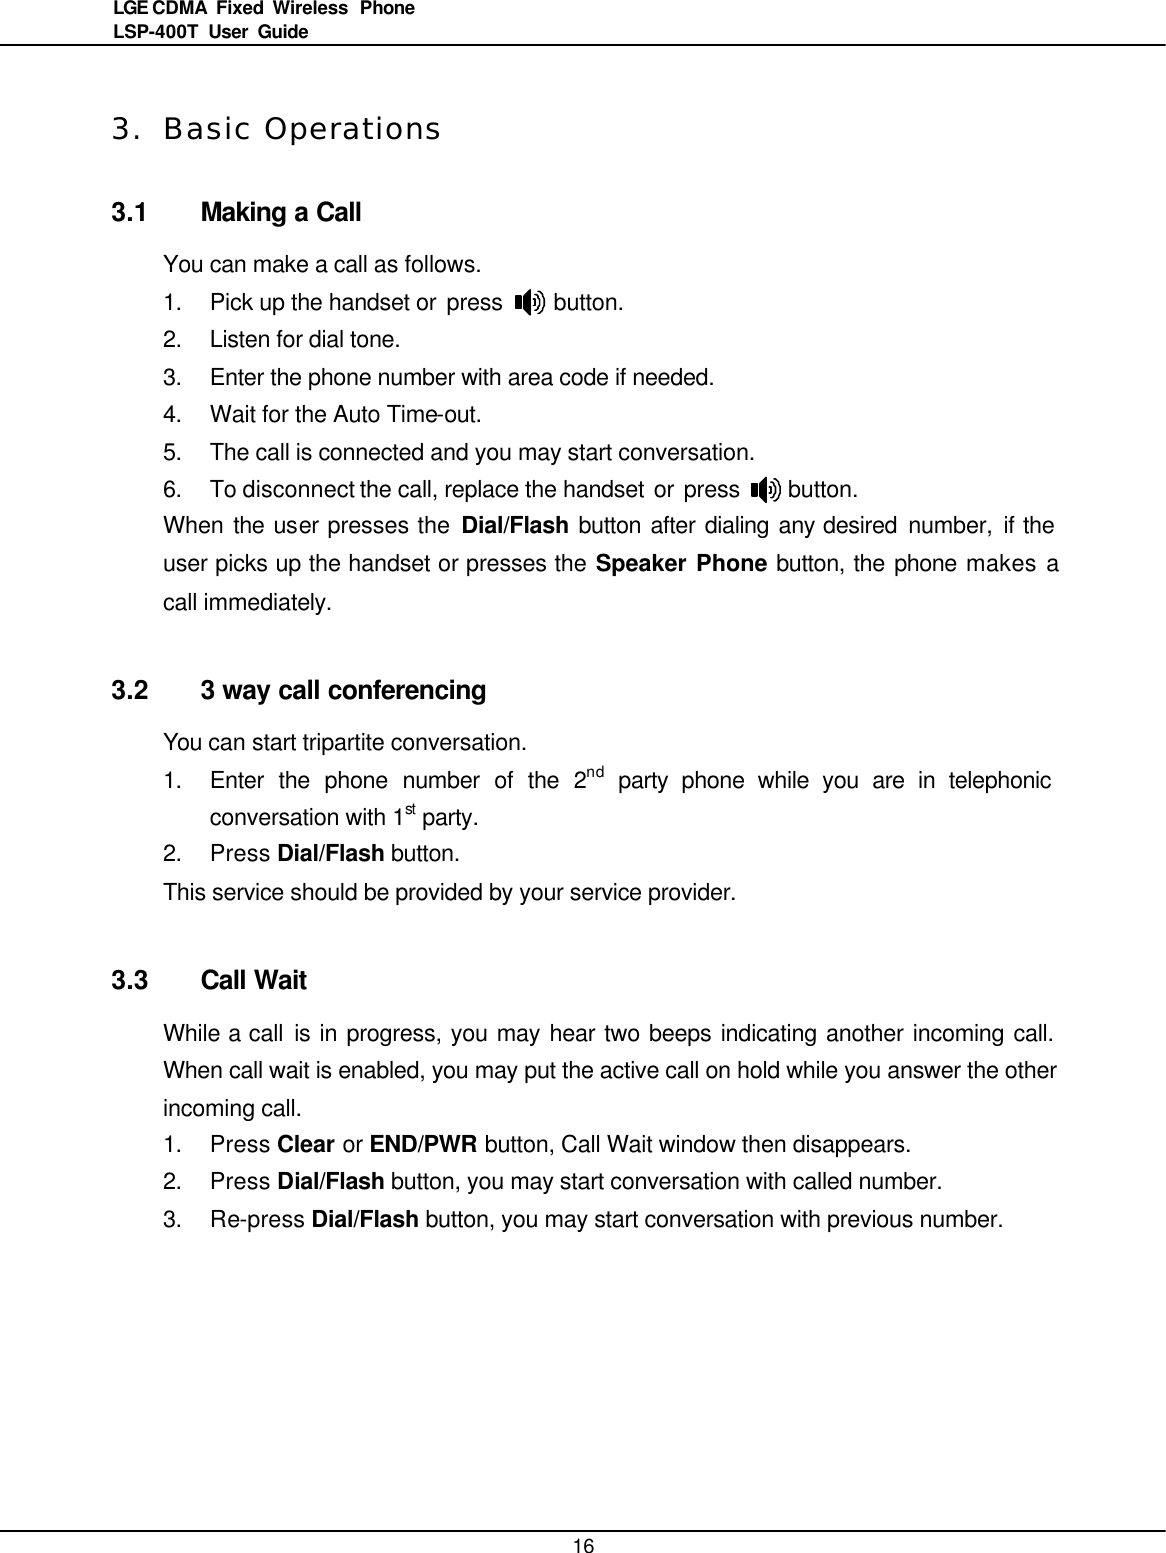   16LGE CDMA Fixed Wireless  Phone LSP-400T  User Guide  3. Basic Operations 3.1 Making a Call You can make a call as follows.   1. Pick up the handset or press     button.   2. Listen for dial tone. 3. Enter the phone number with area code if needed. 4. Wait for the Auto Time-out.   5. The call is connected and you may start conversation. 6. To disconnect the call, replace the handset or press     button. When the user presses the Dial/Flash button after dialing any desired number,  if the user picks up the handset or presses the Speaker Phone button, the phone makes a call immediately.  3.2 3 way call conferencing You can start tripartite conversation.   1. Enter the phone number of the 2nd party phone while you are in telephonic conversation with 1st party. 2. Press Dial/Flash button. This service should be provided by your service provider.  3.3 Call Wait While a call is in progress, you may hear two beeps indicating another incoming call. When call wait is enabled, you may put the active call on hold while you answer the other incoming call. 1. Press Clear or END/PWR button, Call Wait window then disappears. 2. Press Dial/Flash button, you may start conversation with called number. 3. Re-press Dial/Flash button, you may start conversation with previous number.   